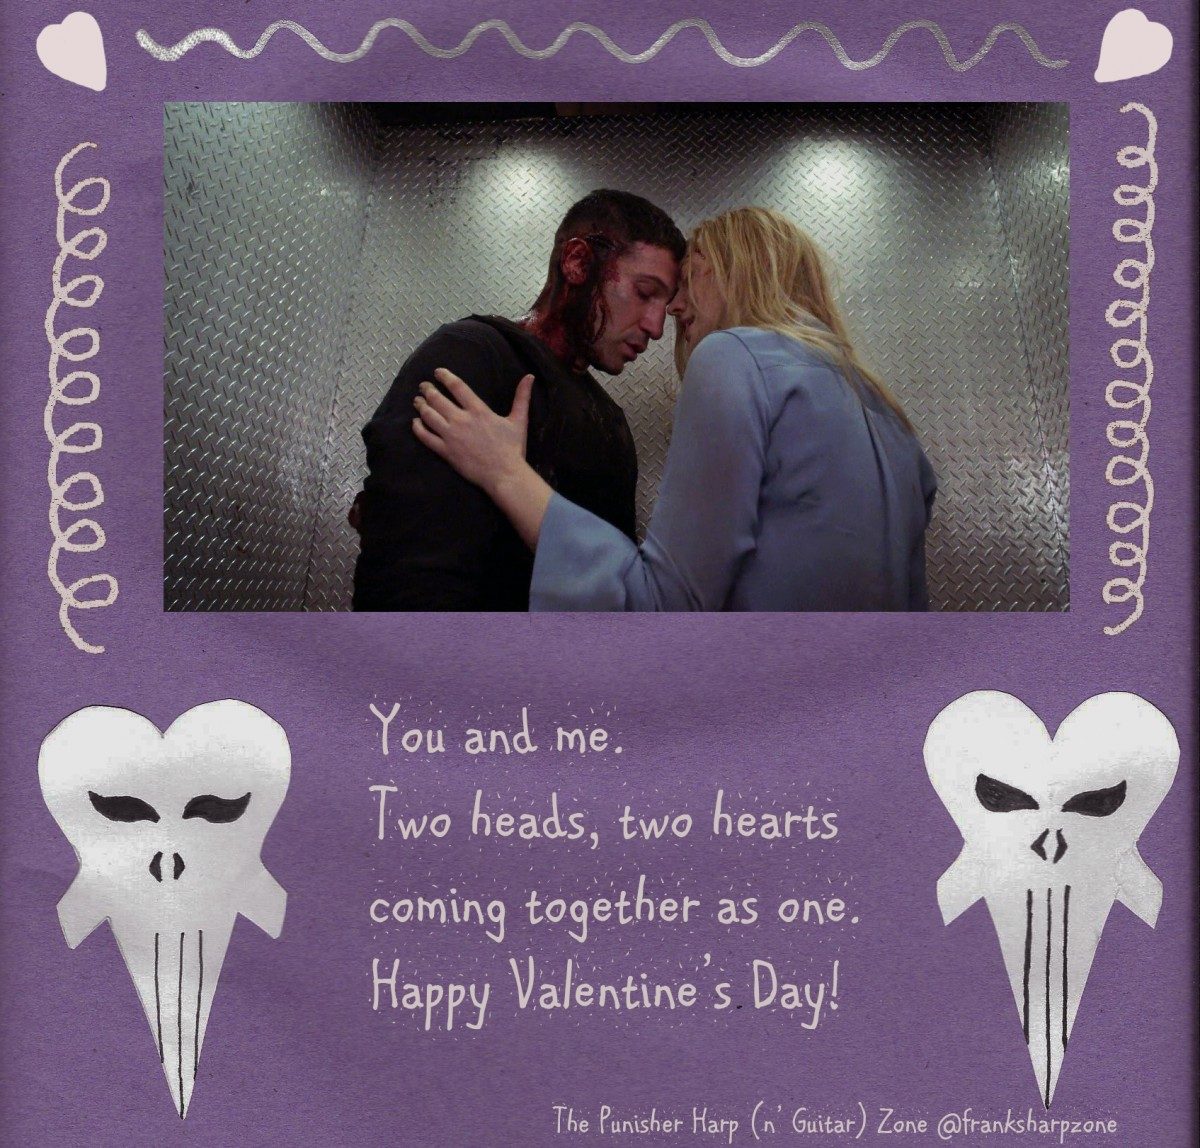 A Wonderful Valentine for all the #Kastle fans.